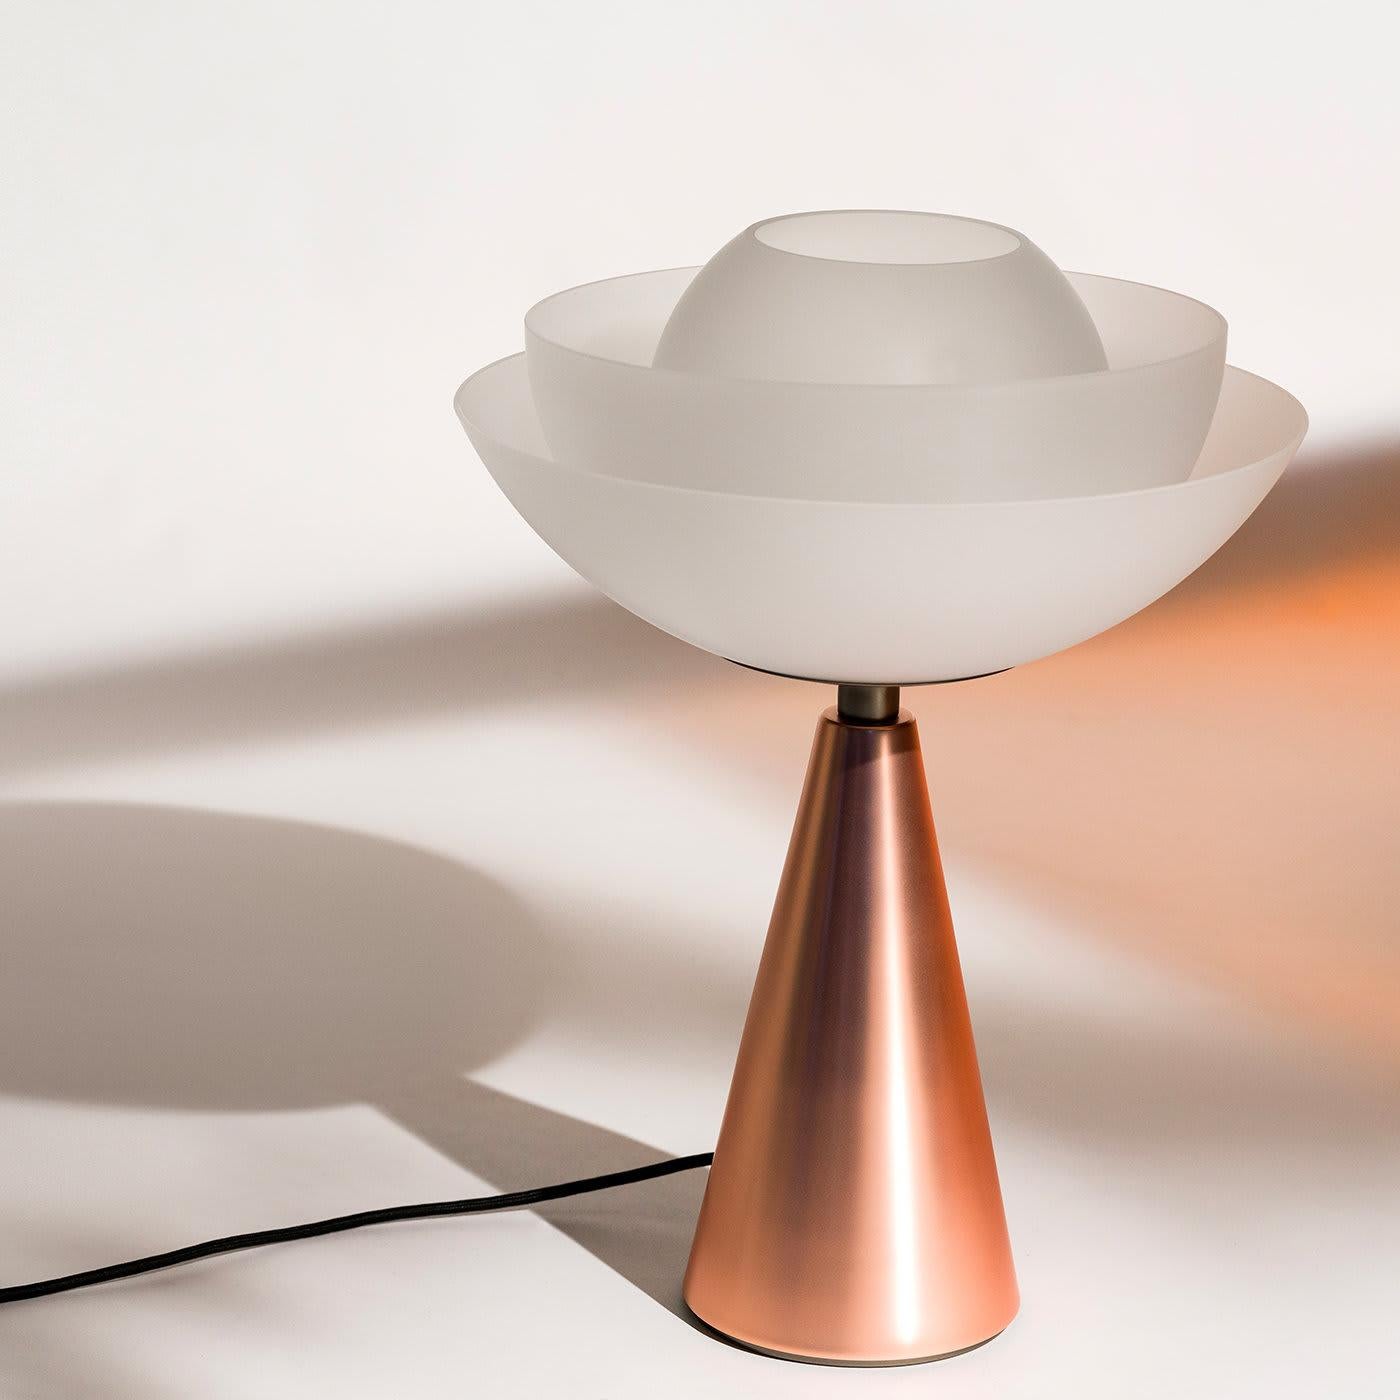 This striking Lotus metal table lamp will bring a dynamic elegance to your living room, lounge room or bedroom. The sleek base in galvanized metal with a matte copper finish is complimented with a diffuser in clear blown acid etched glass. A simple